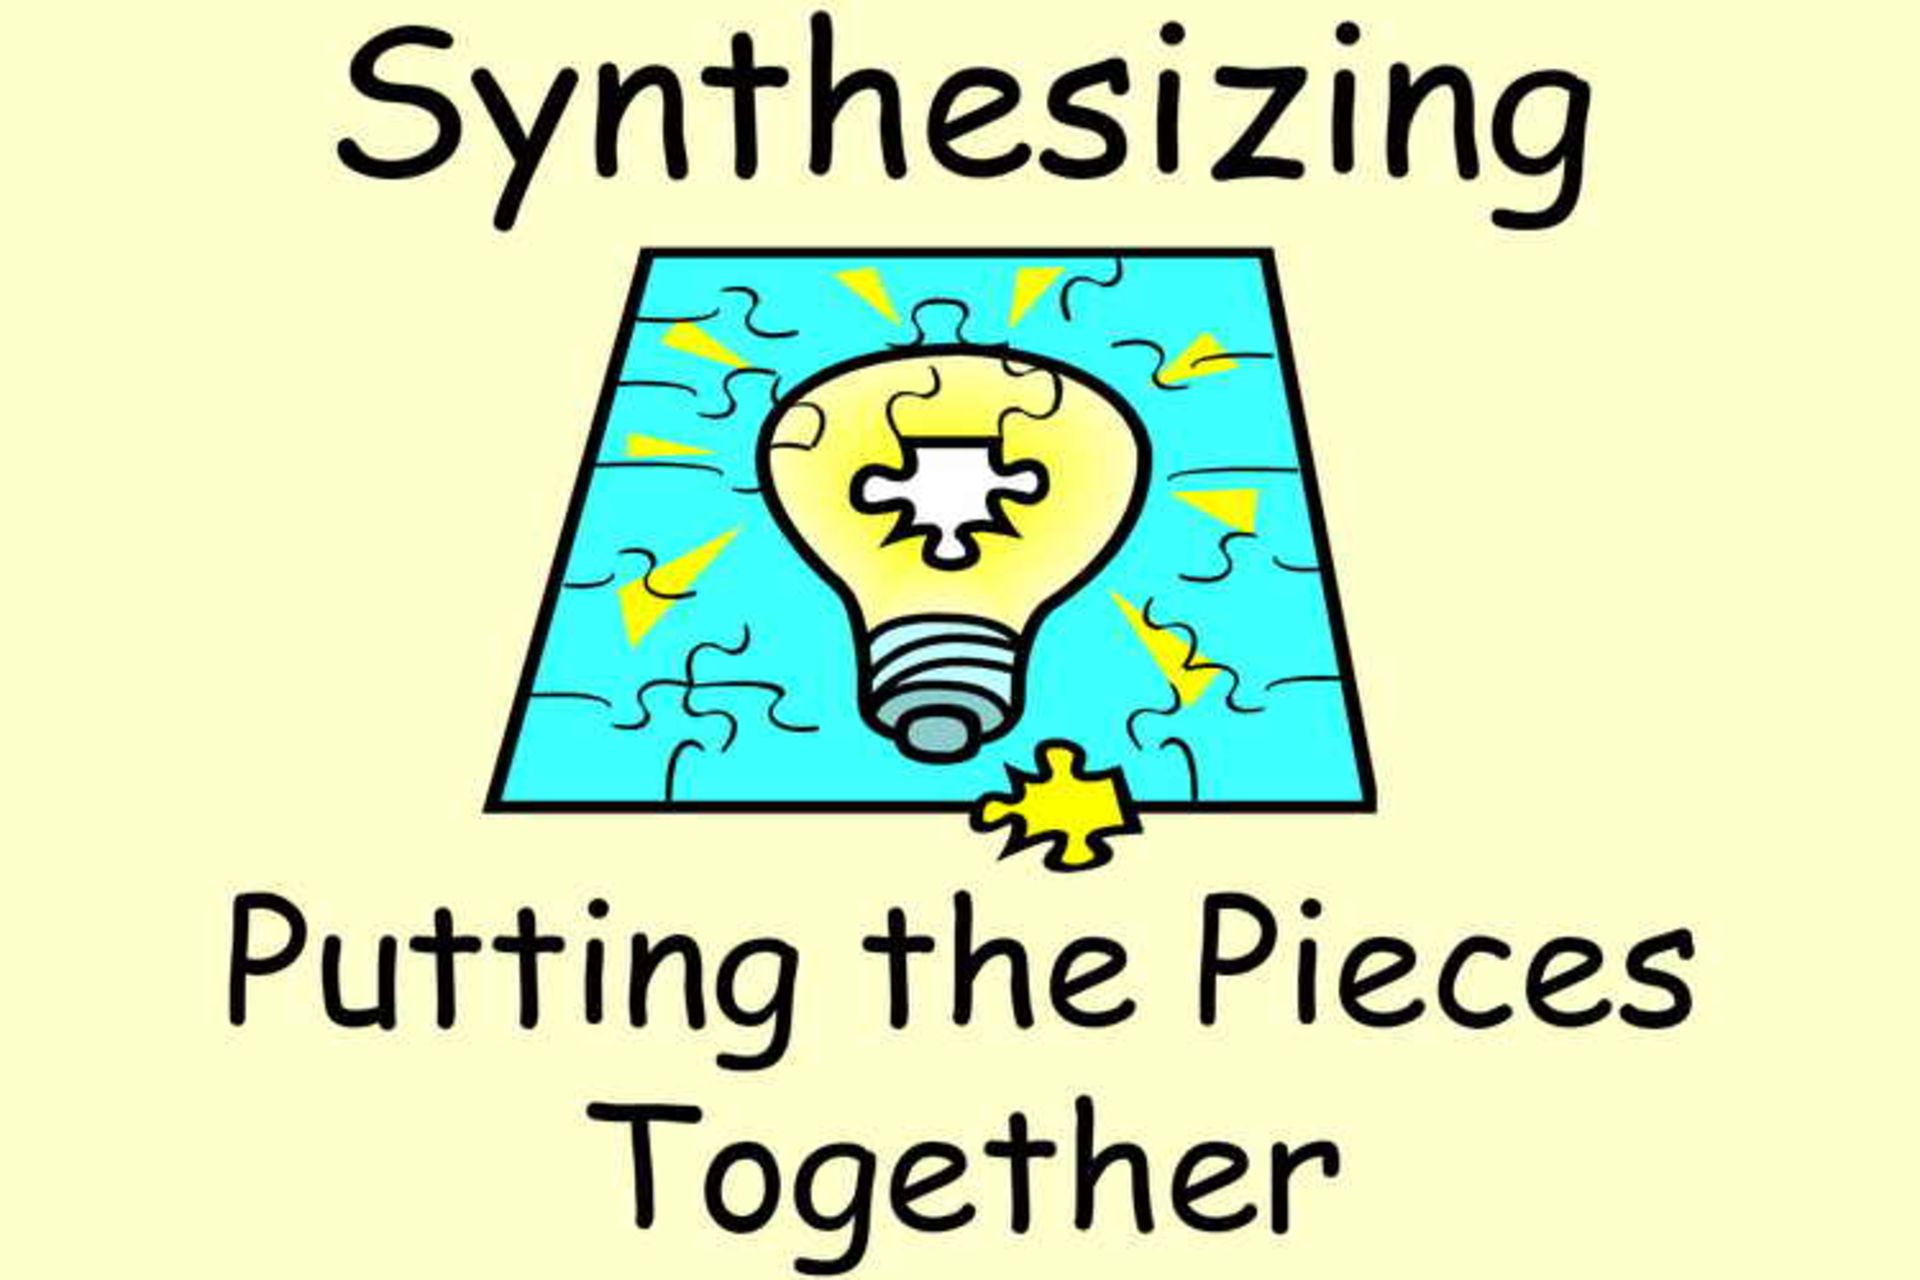  synthesize what you have learned